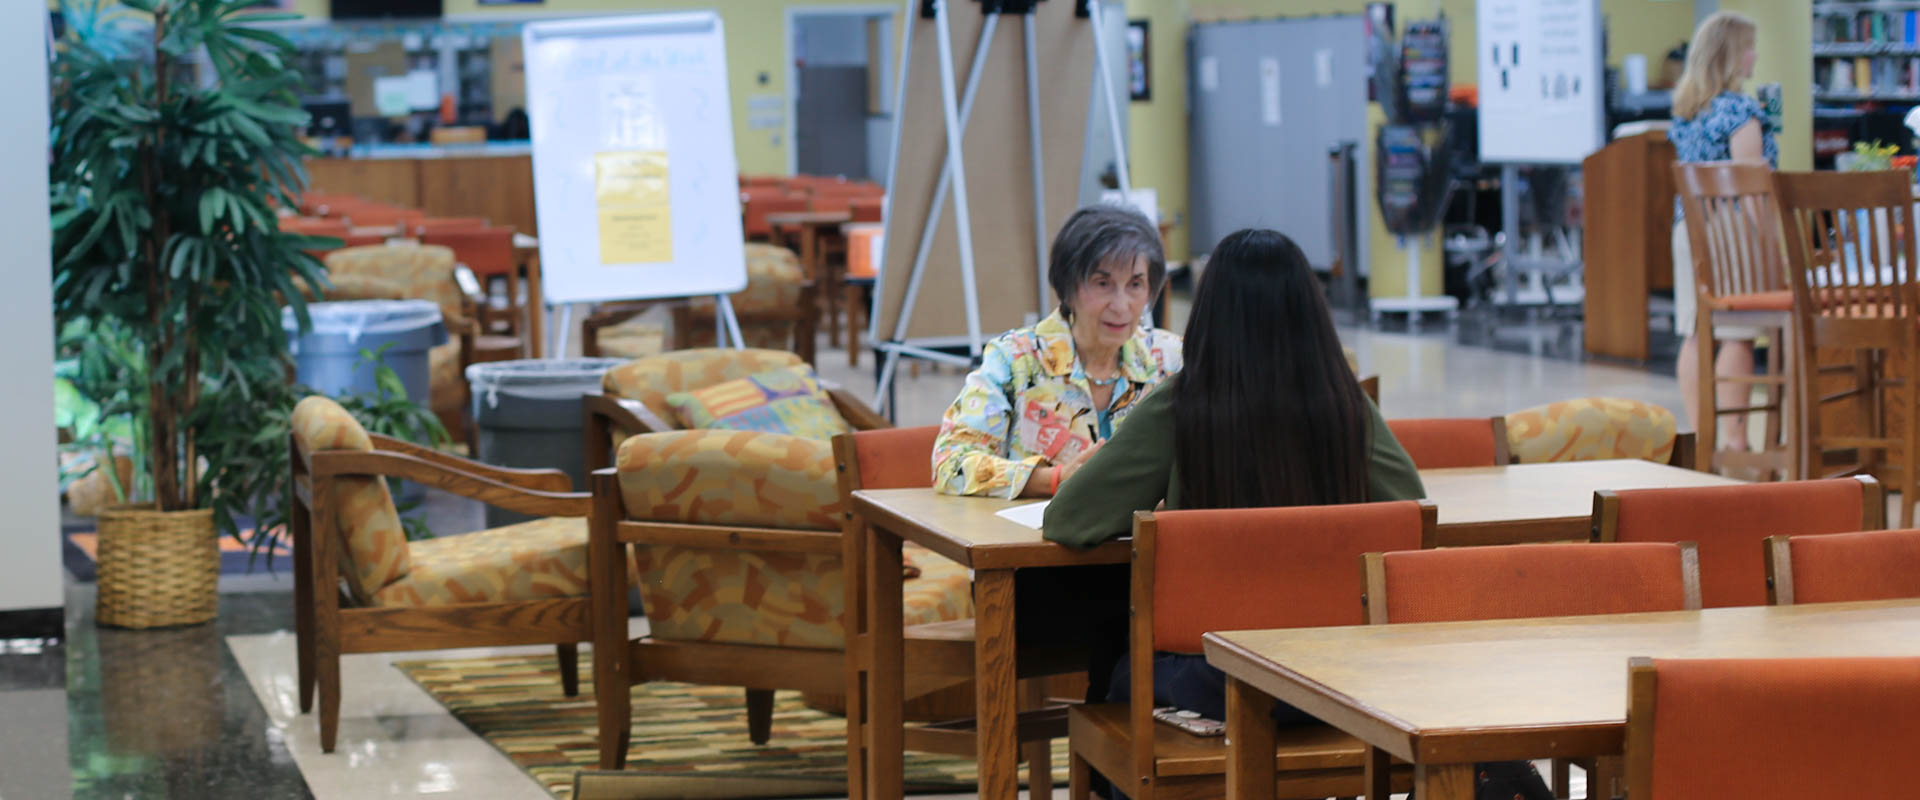 Two people sitting at table in library, one mentor and one mentee, older woman talking to younger student with her back turned to camera, Hillsborough Education Foundation